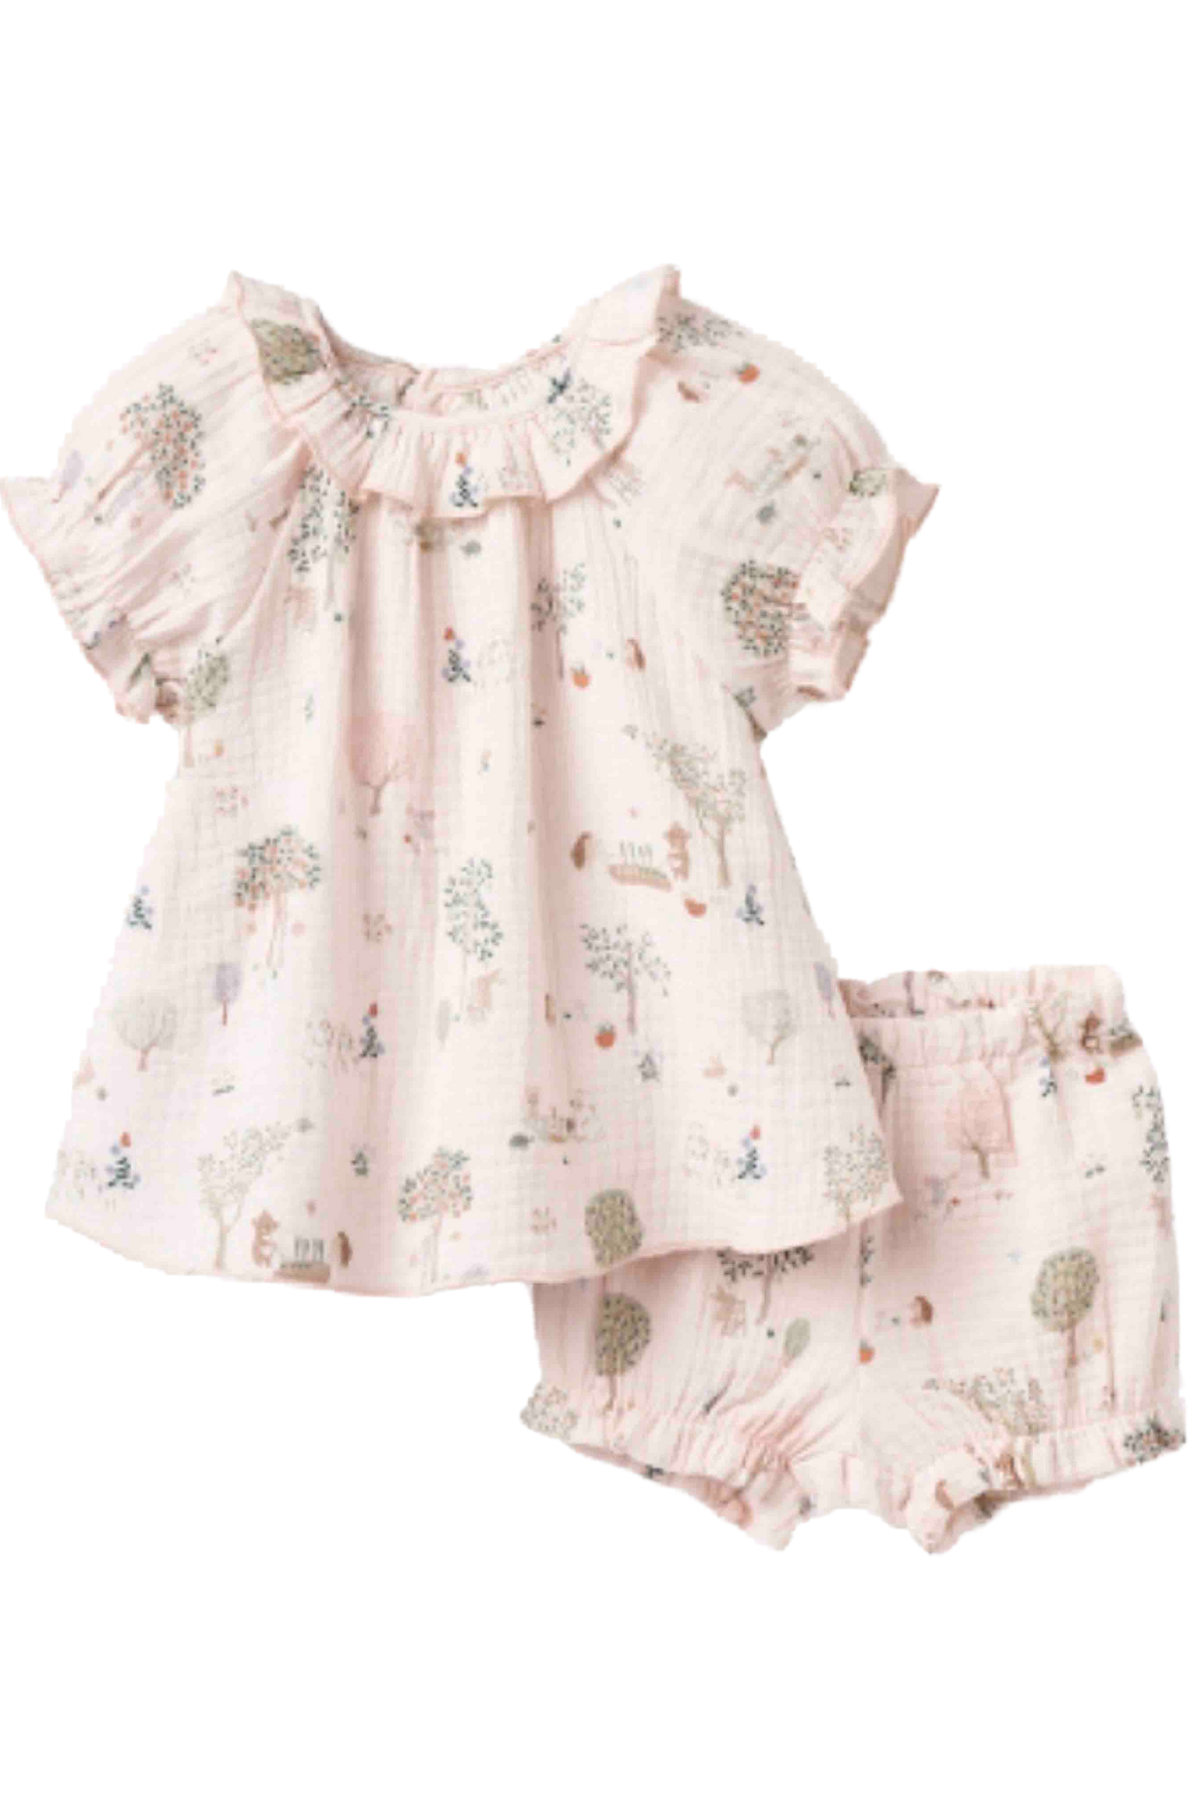 Garden Picnic Outfit by Elegant Baby 